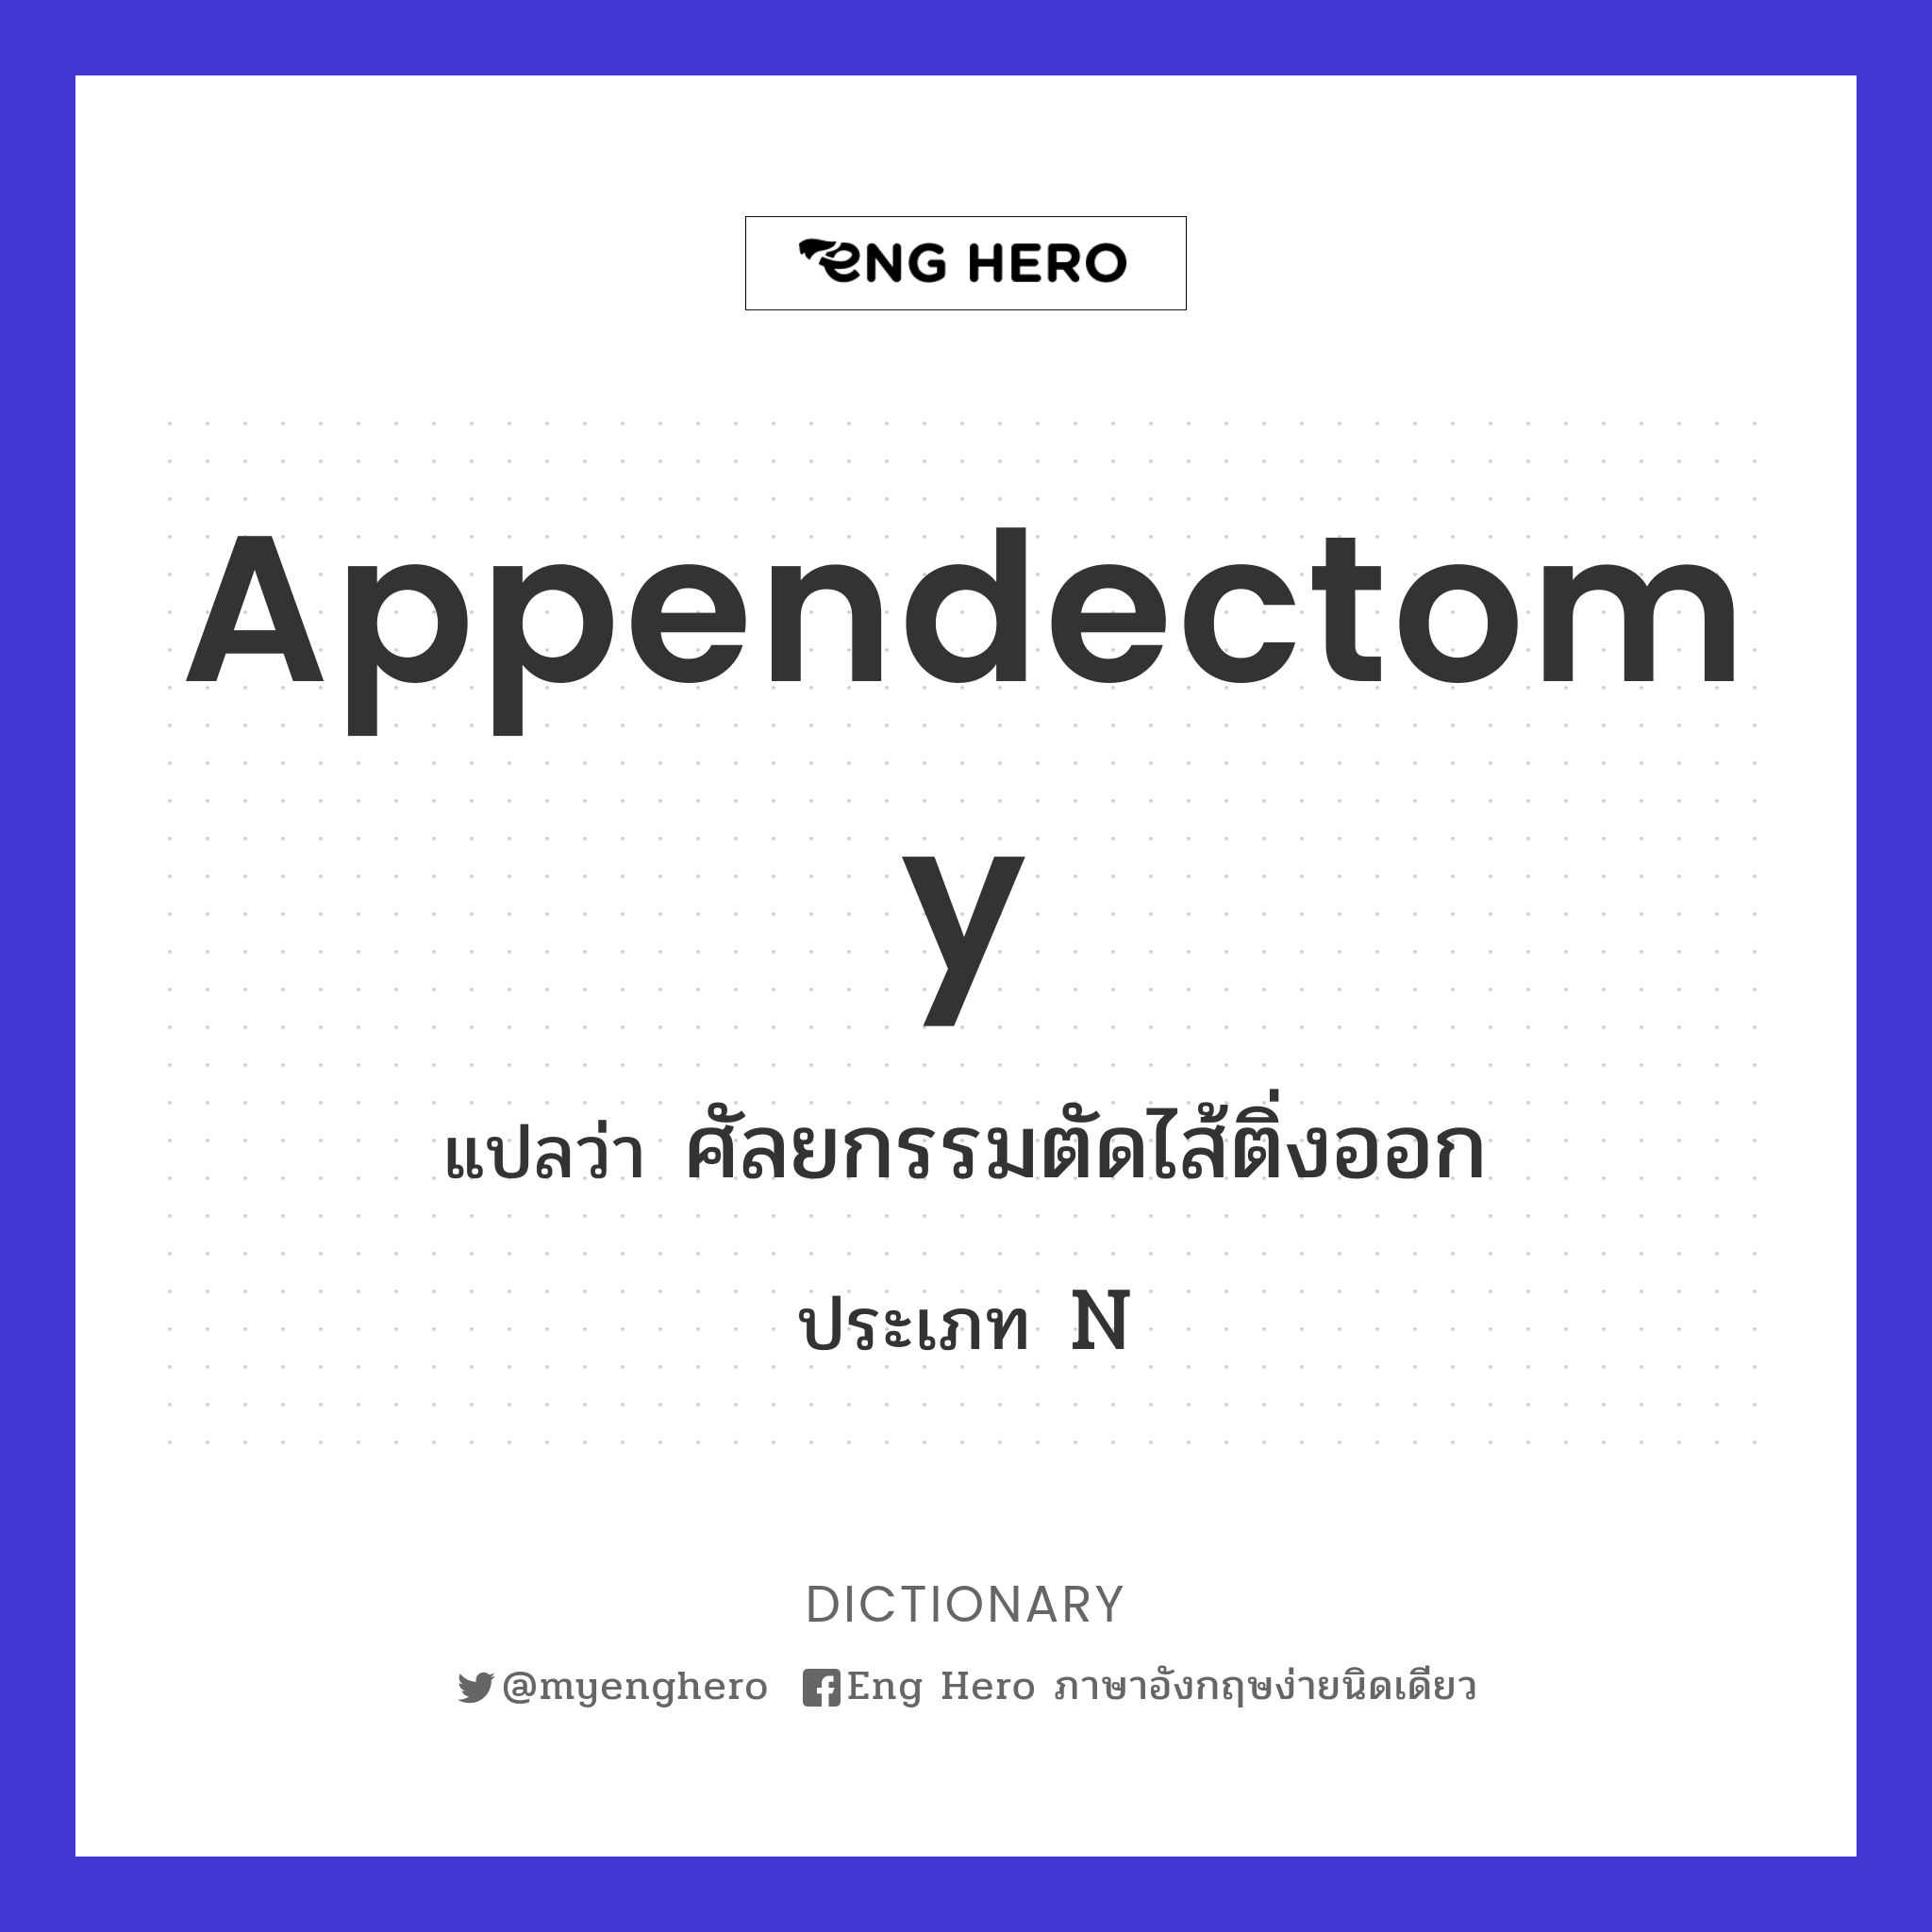 appendectomy